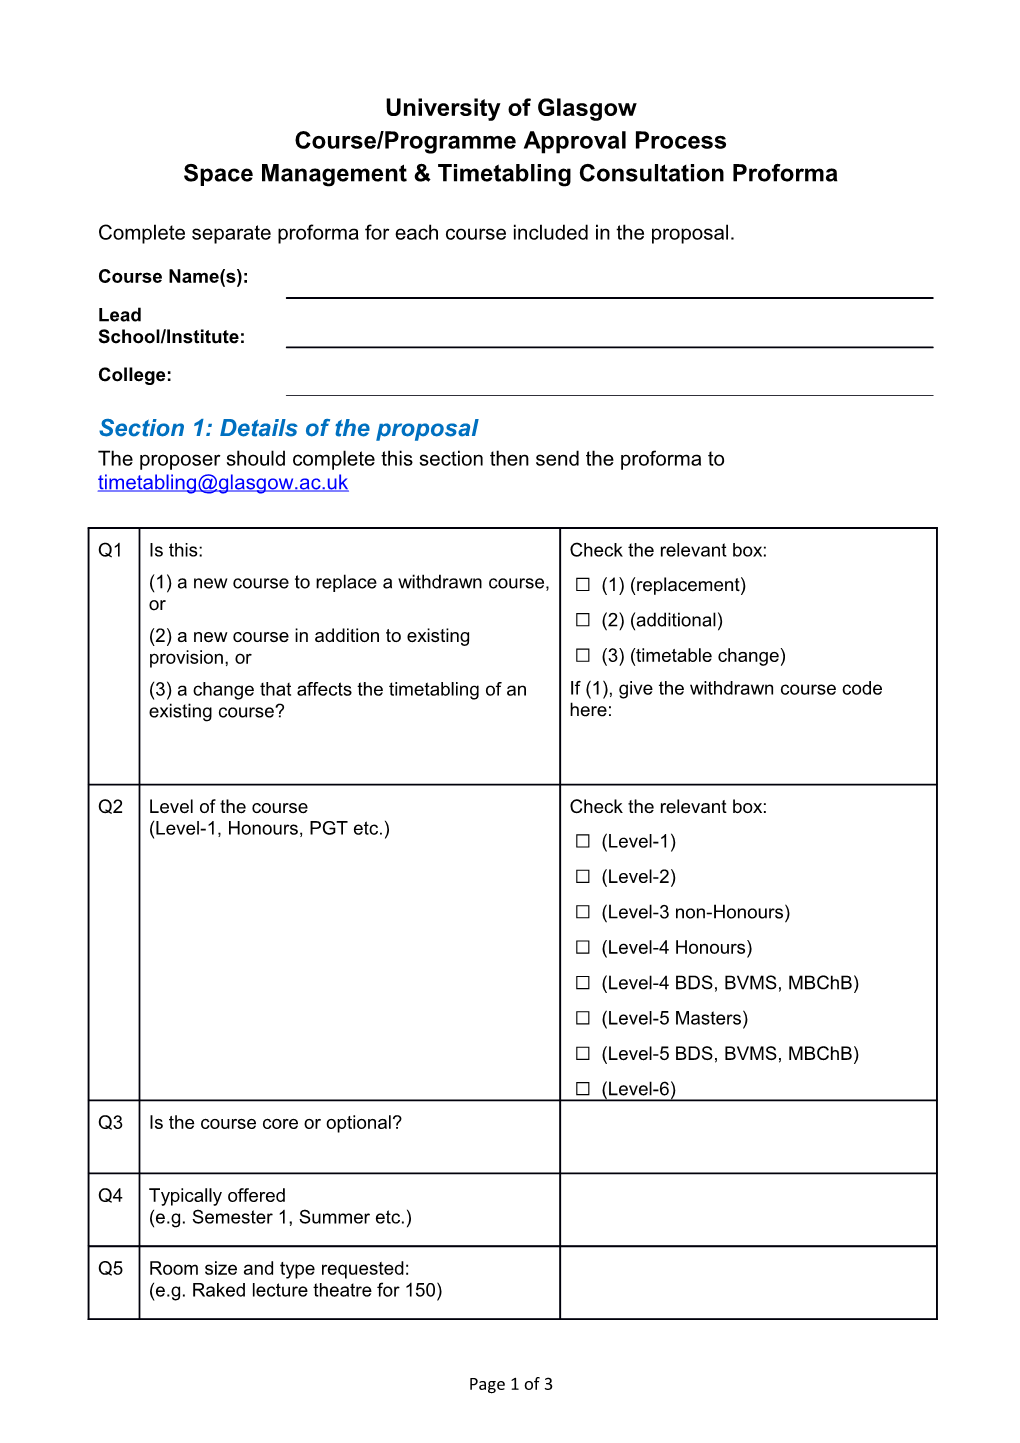 Course/Programme Approval Process